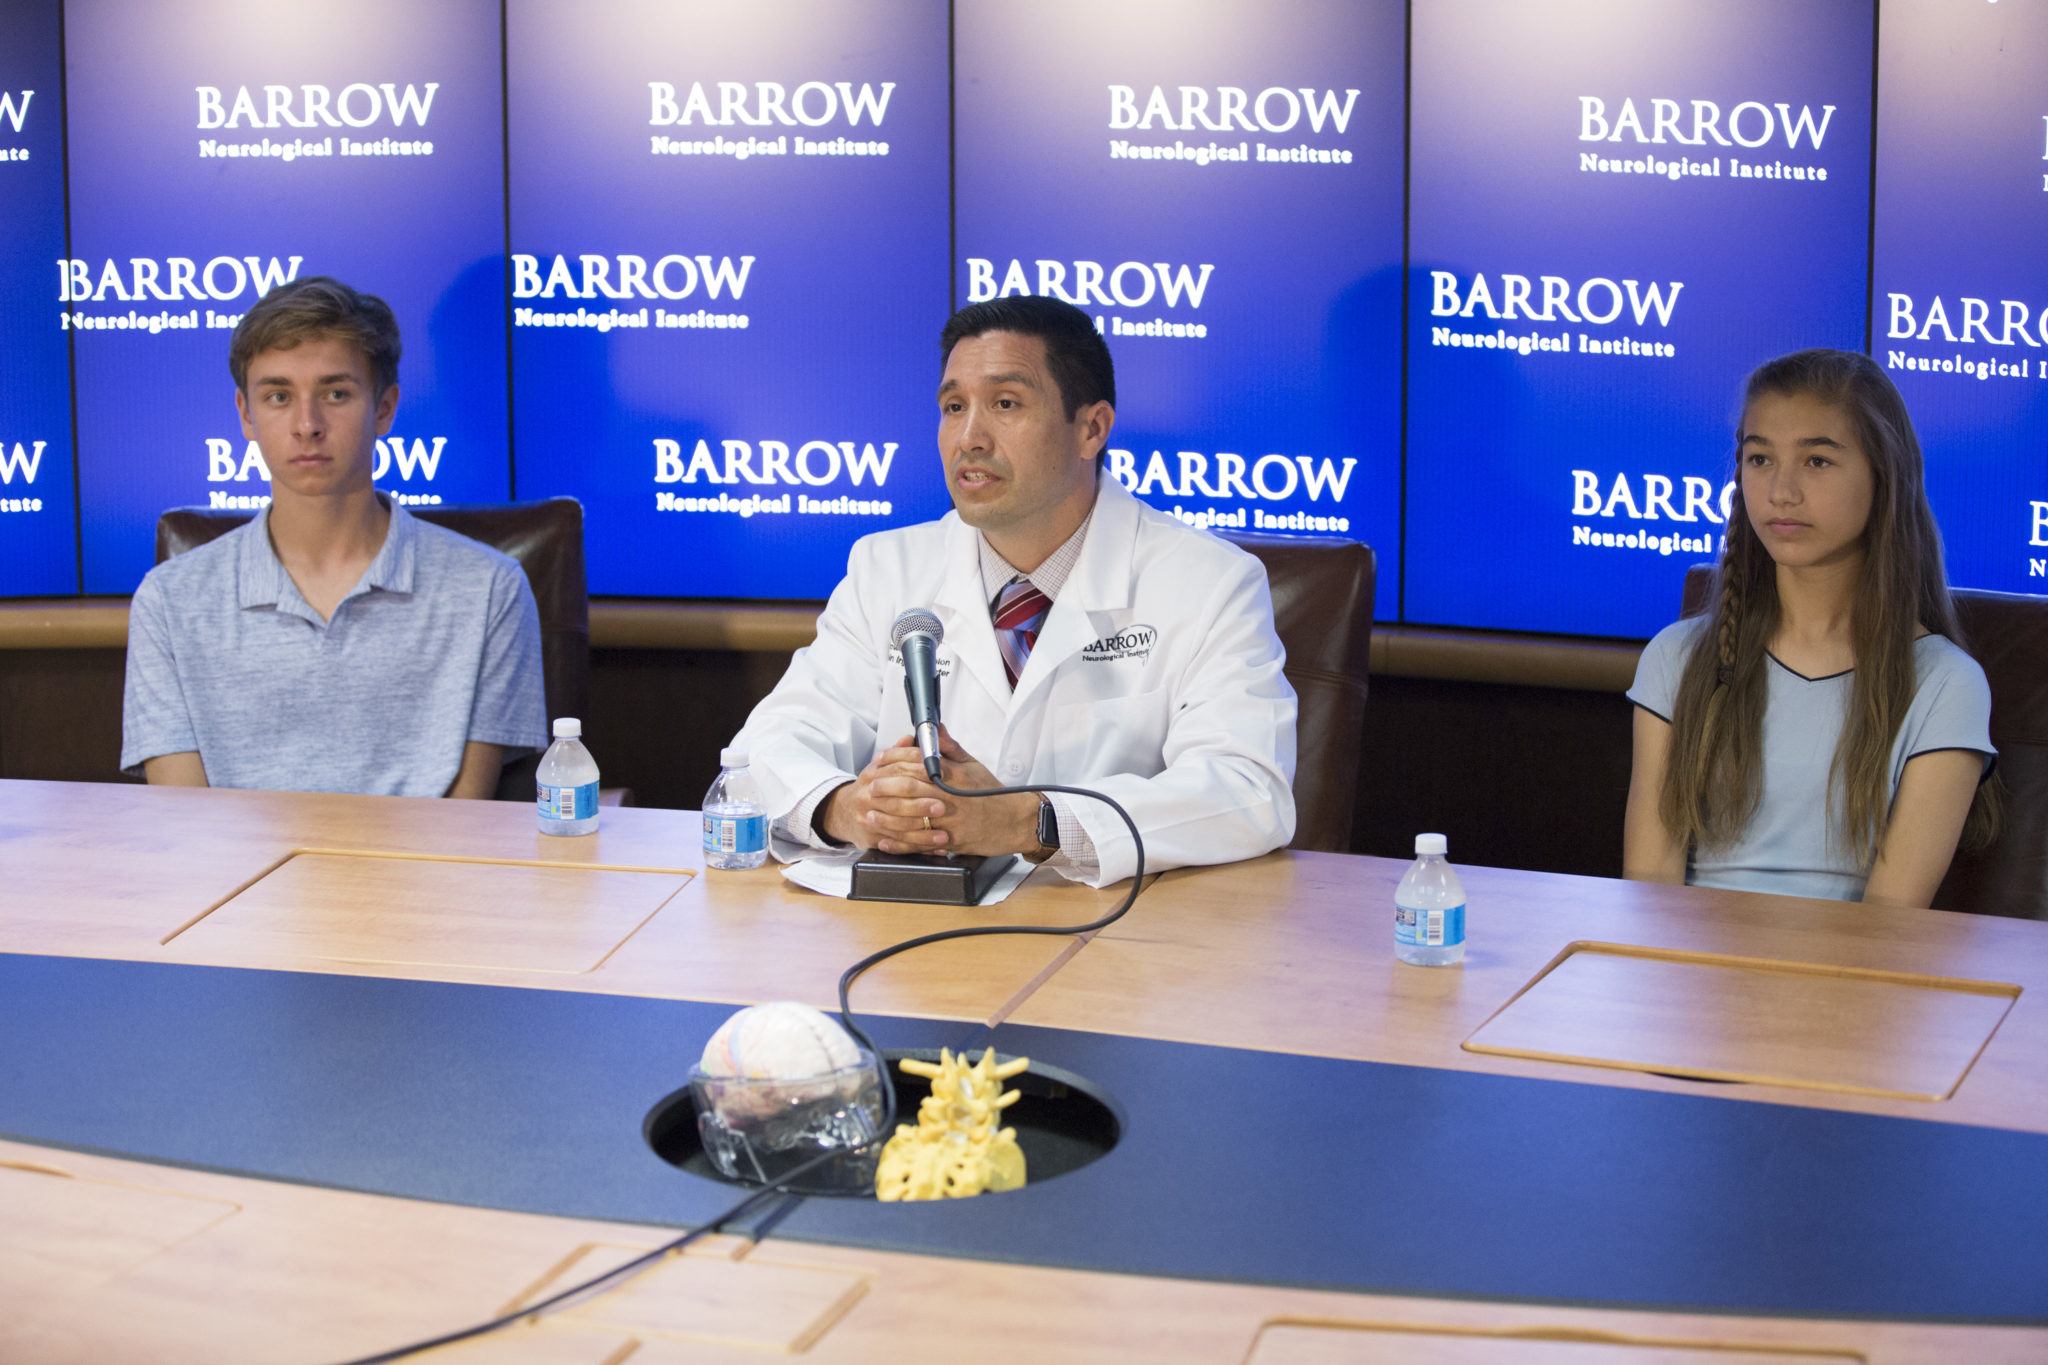 Barrow Press Conference on Concussions